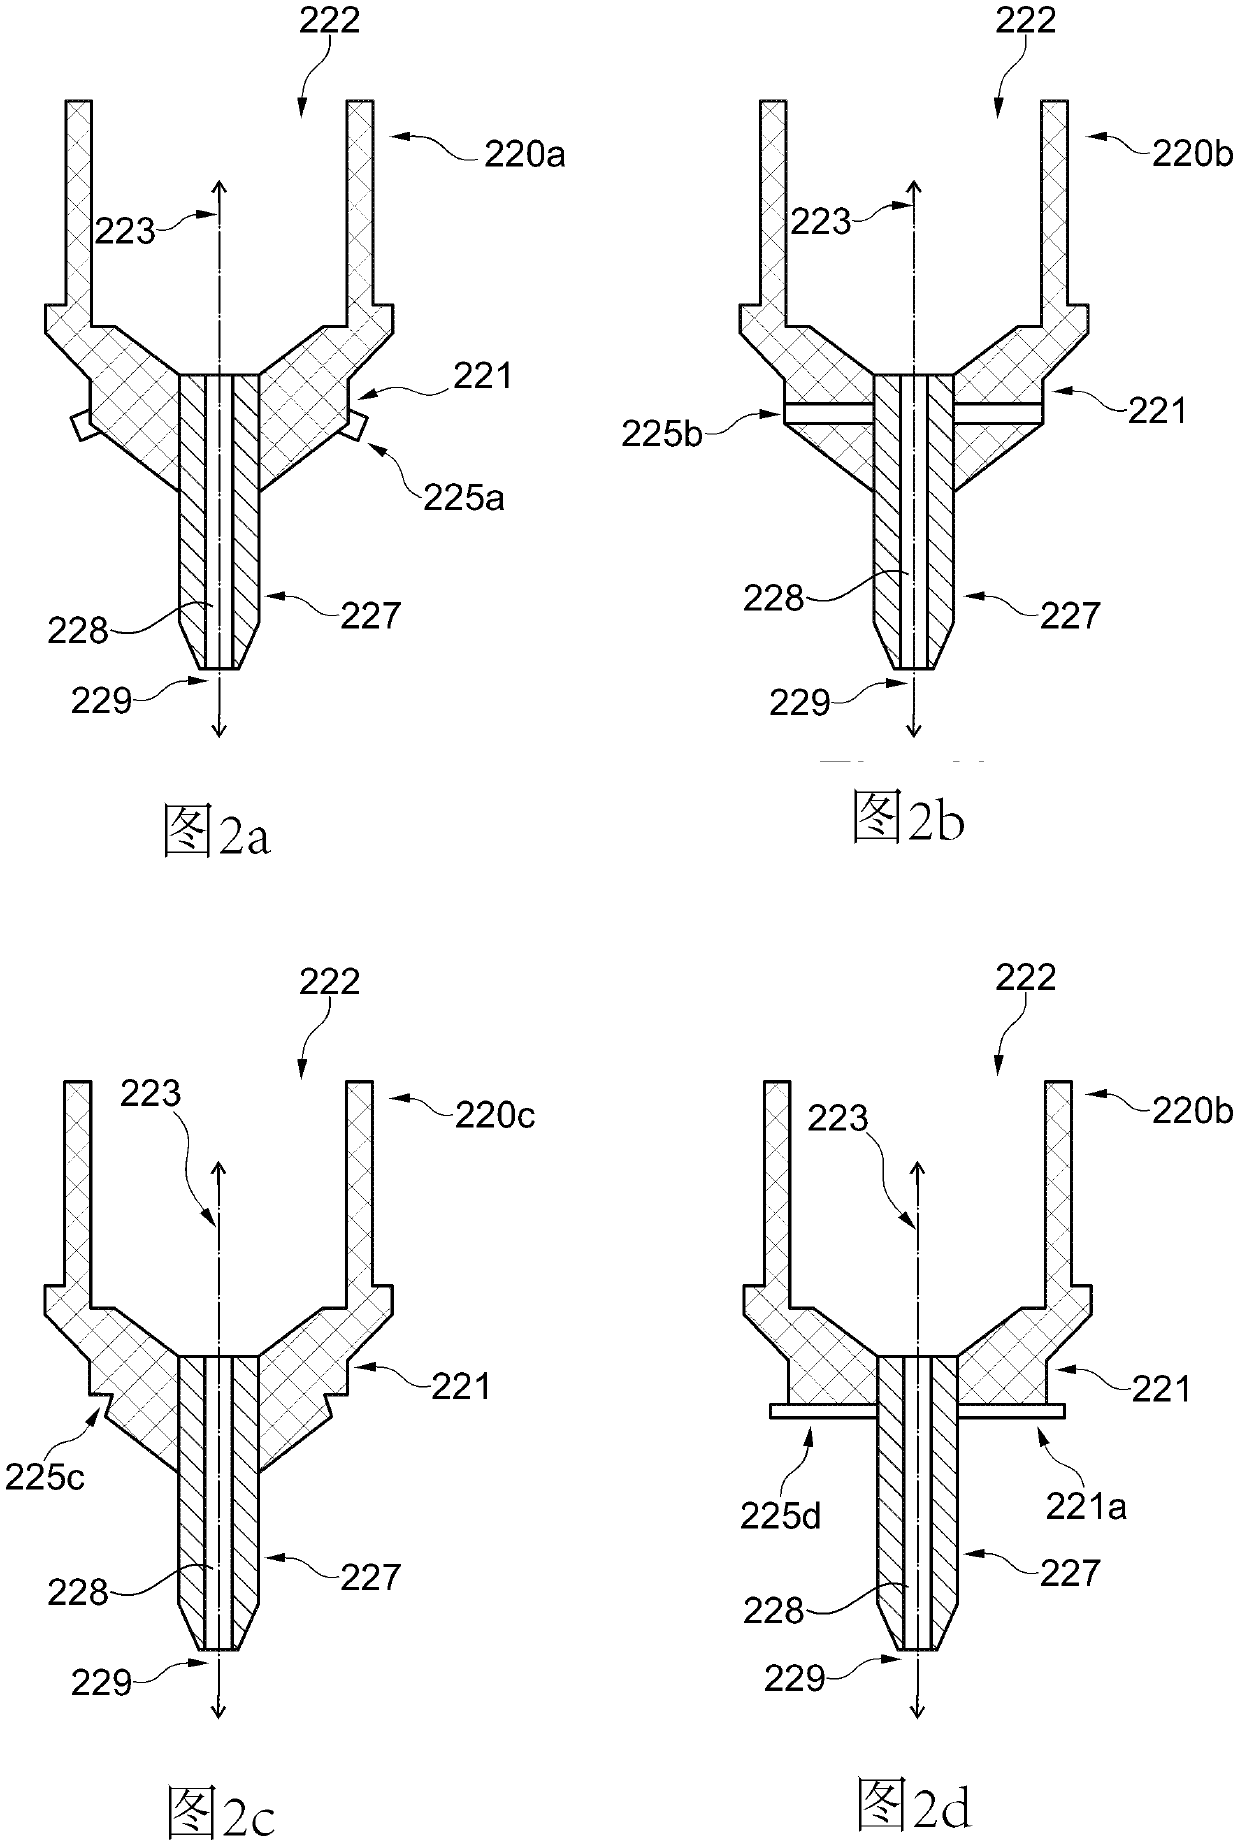 Method and device of assembling components, considering the relative spatial position ifnormation